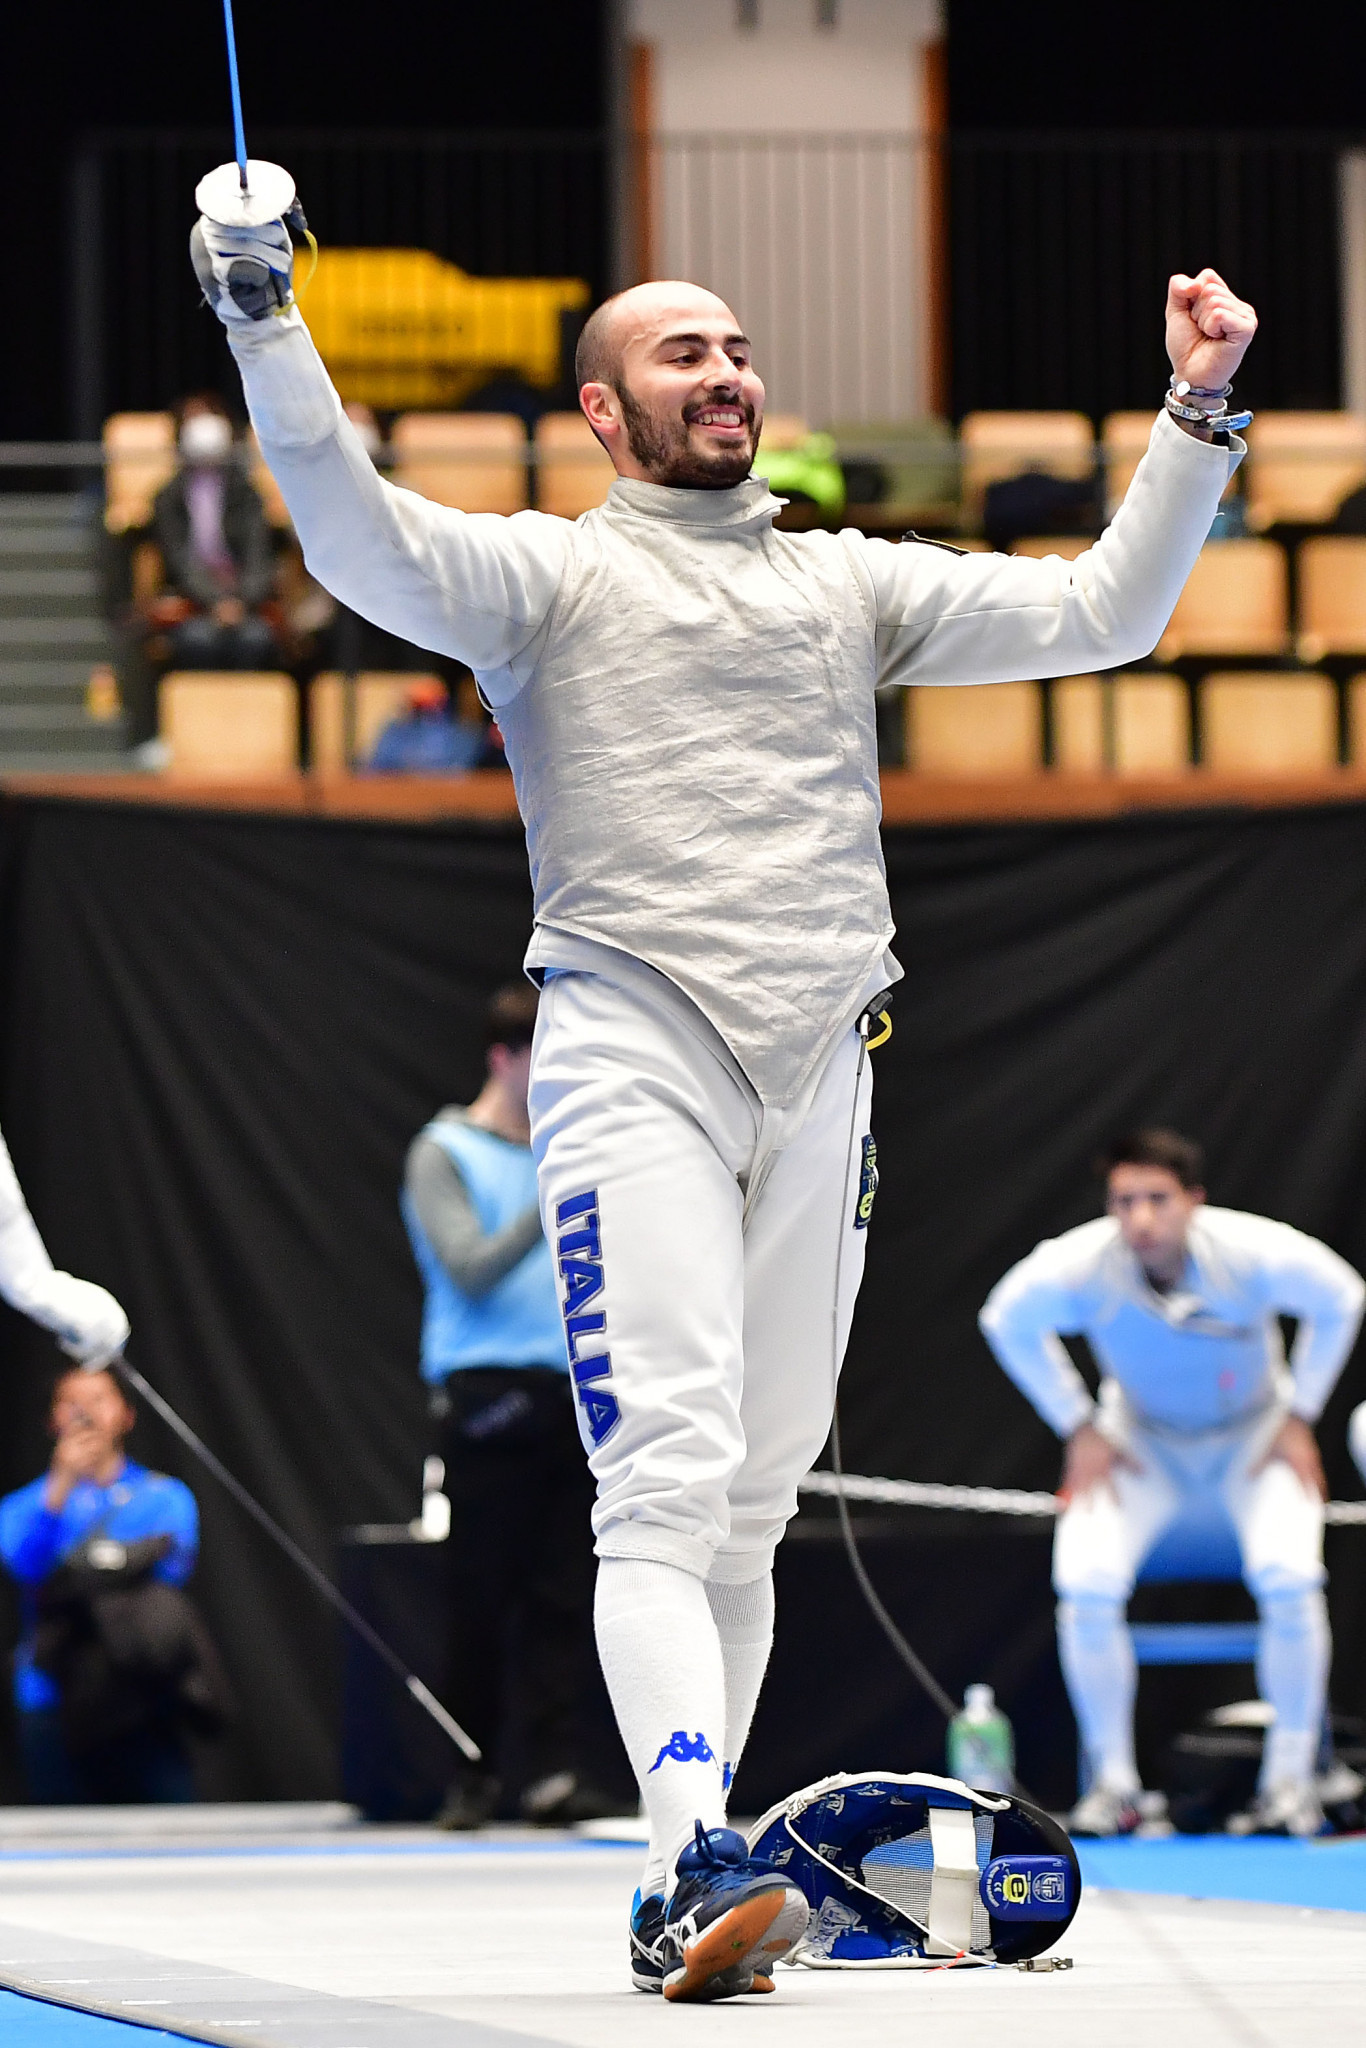 Italy and United States poised for battle in FIE Men's Foil Tokyo 2020 test event